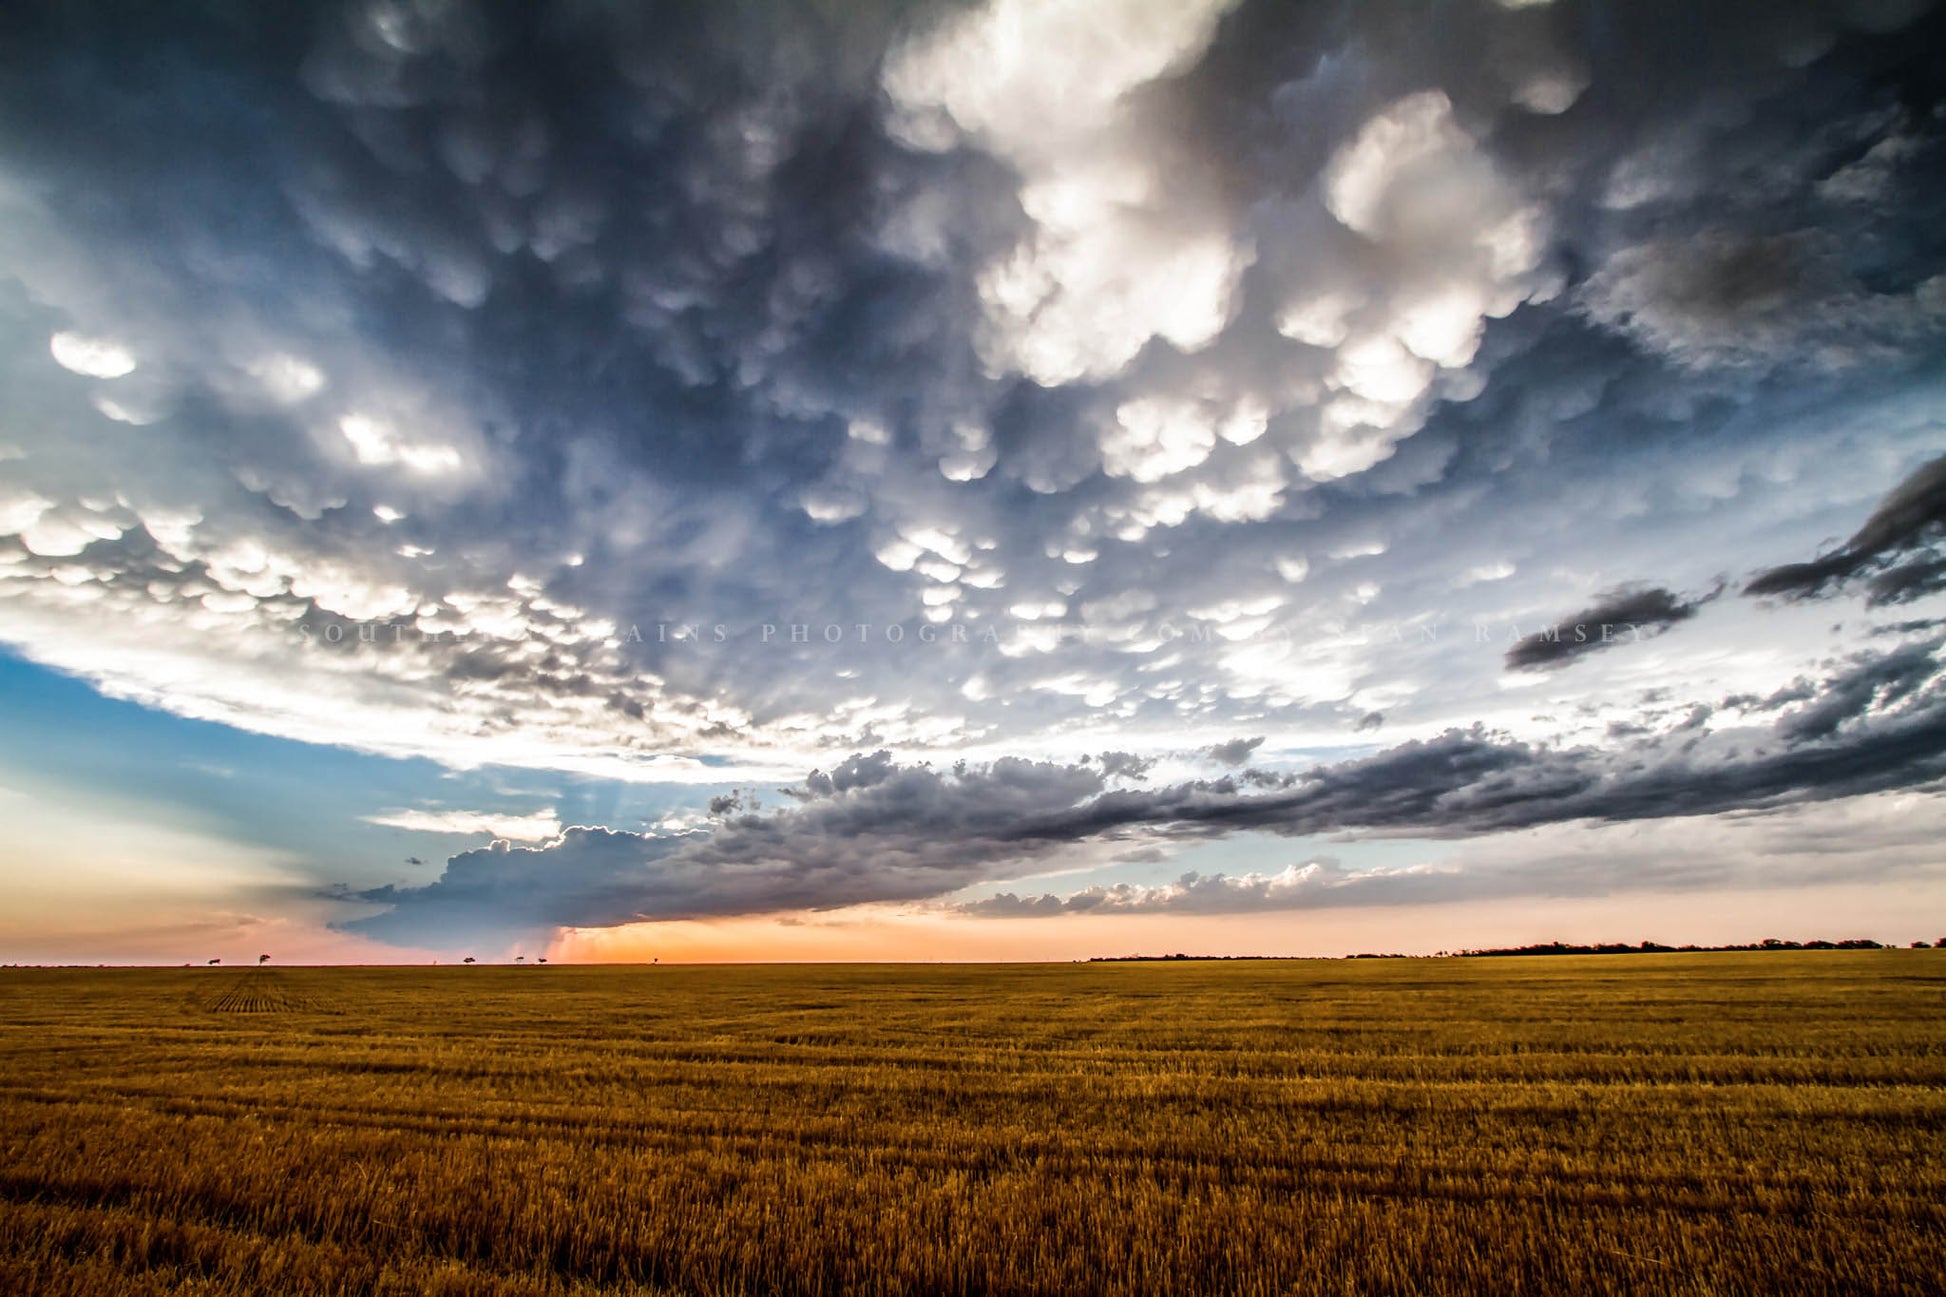 Western photography print of a scenic sky full of storm clouds over a field after a stormy day on the plains of Texas by Sean Ramsey of Southern Plains Photography.